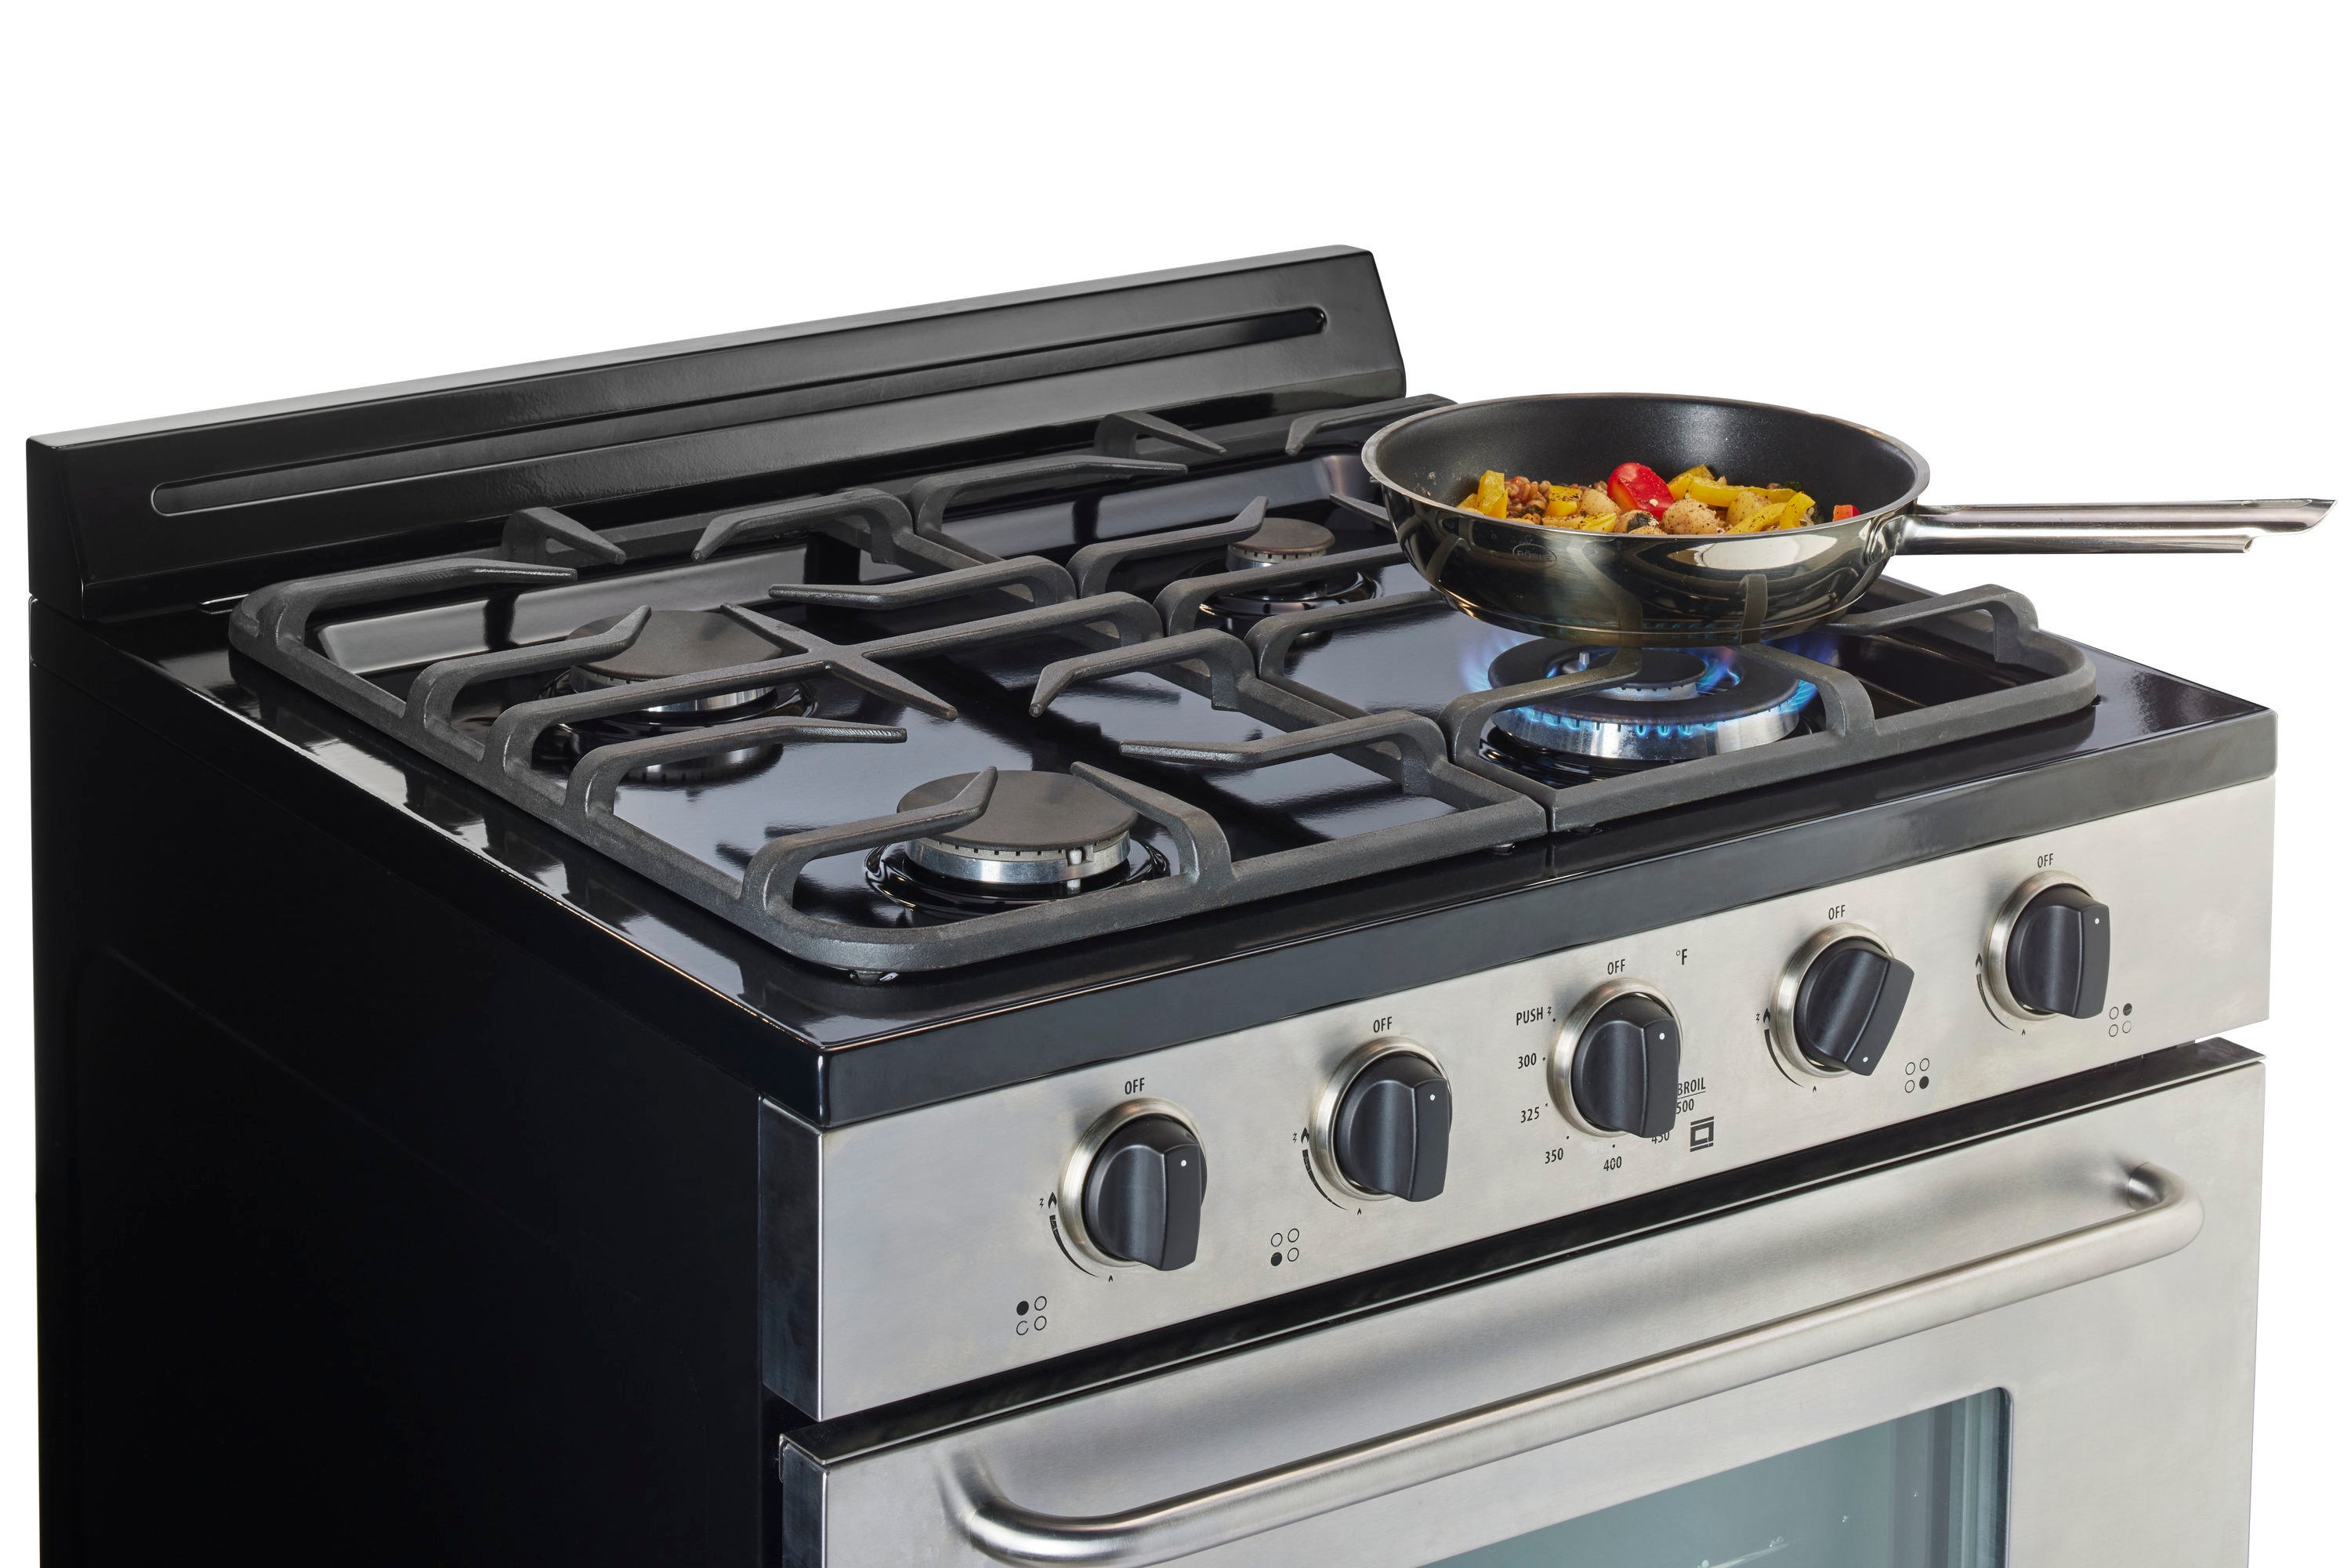 Unique Off-Grid 30-in 4 Burners 3.9-cu ft Freestanding Liquid Propane GAS Range (Stainless Steel) | UGP-30G of2 S/S